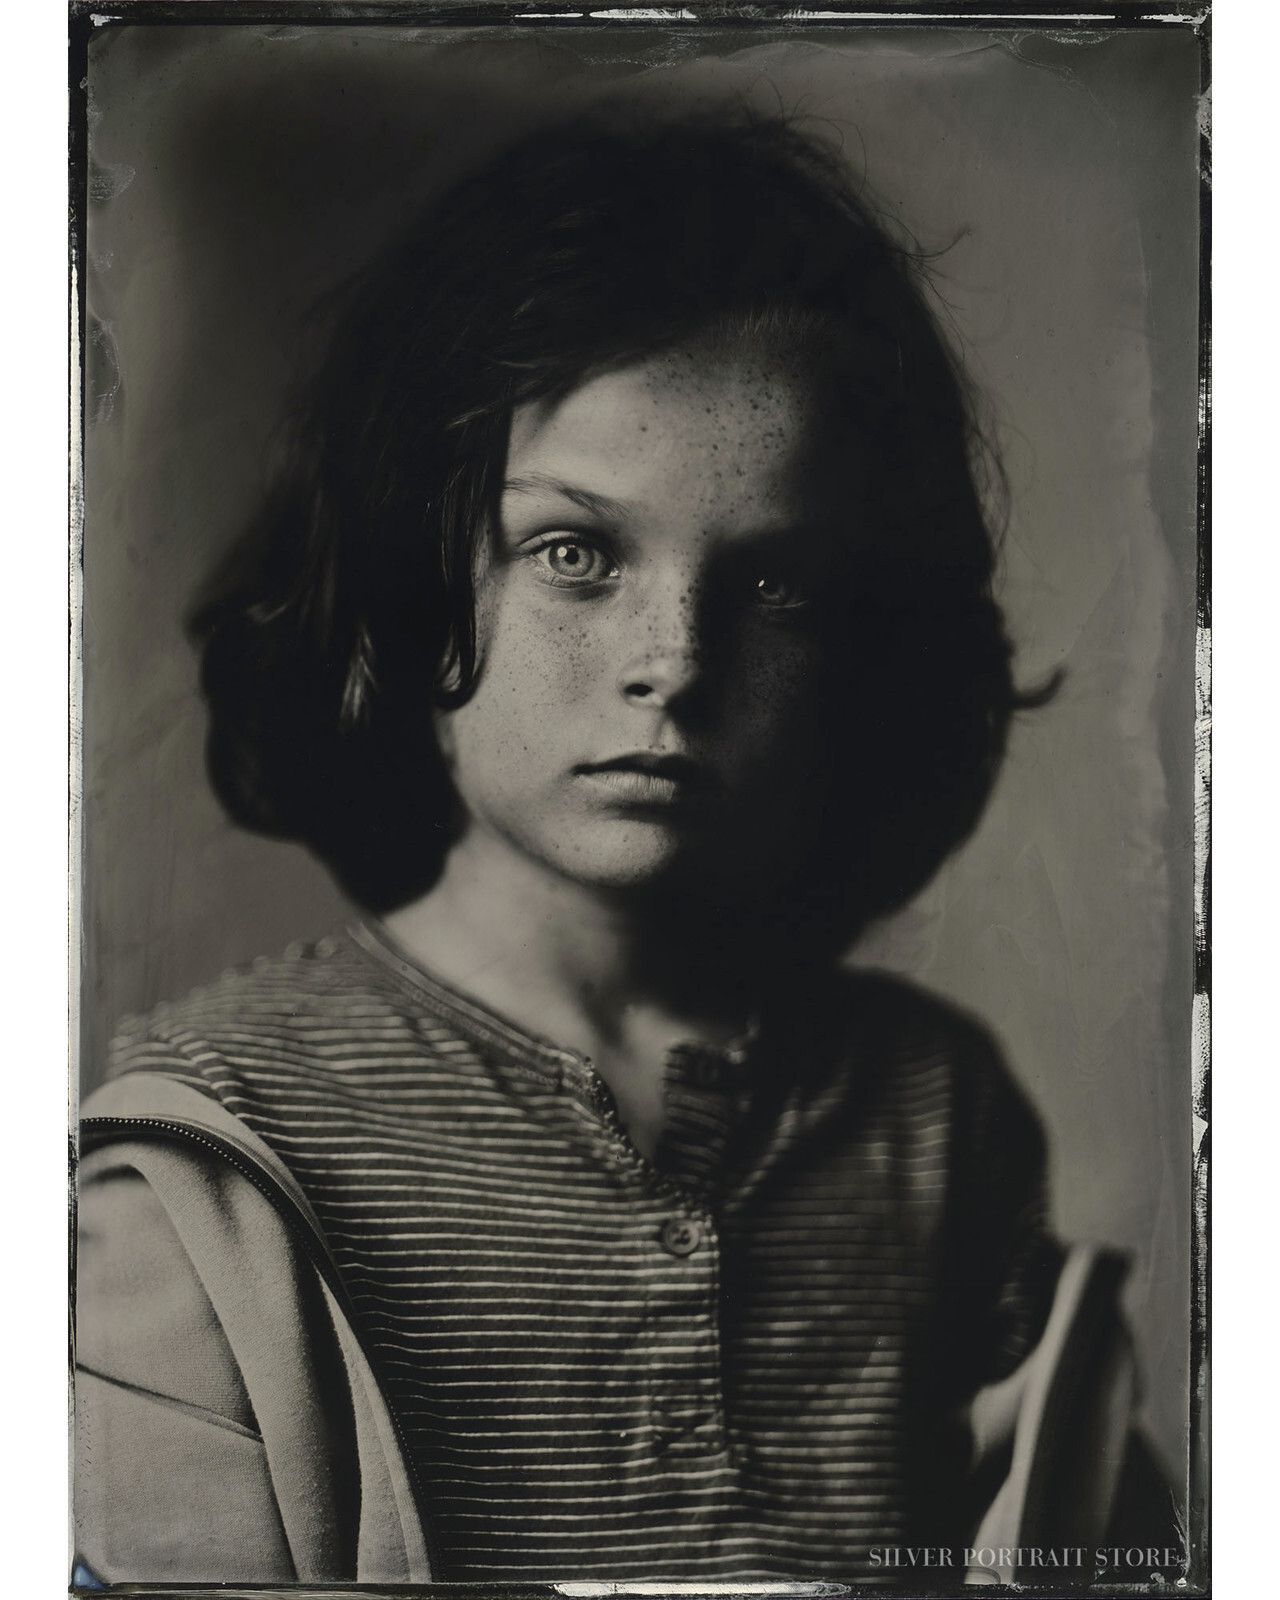 Mika-Silver Portrait Store-Wet plate collodion-Tintype 13 x 18 cm.